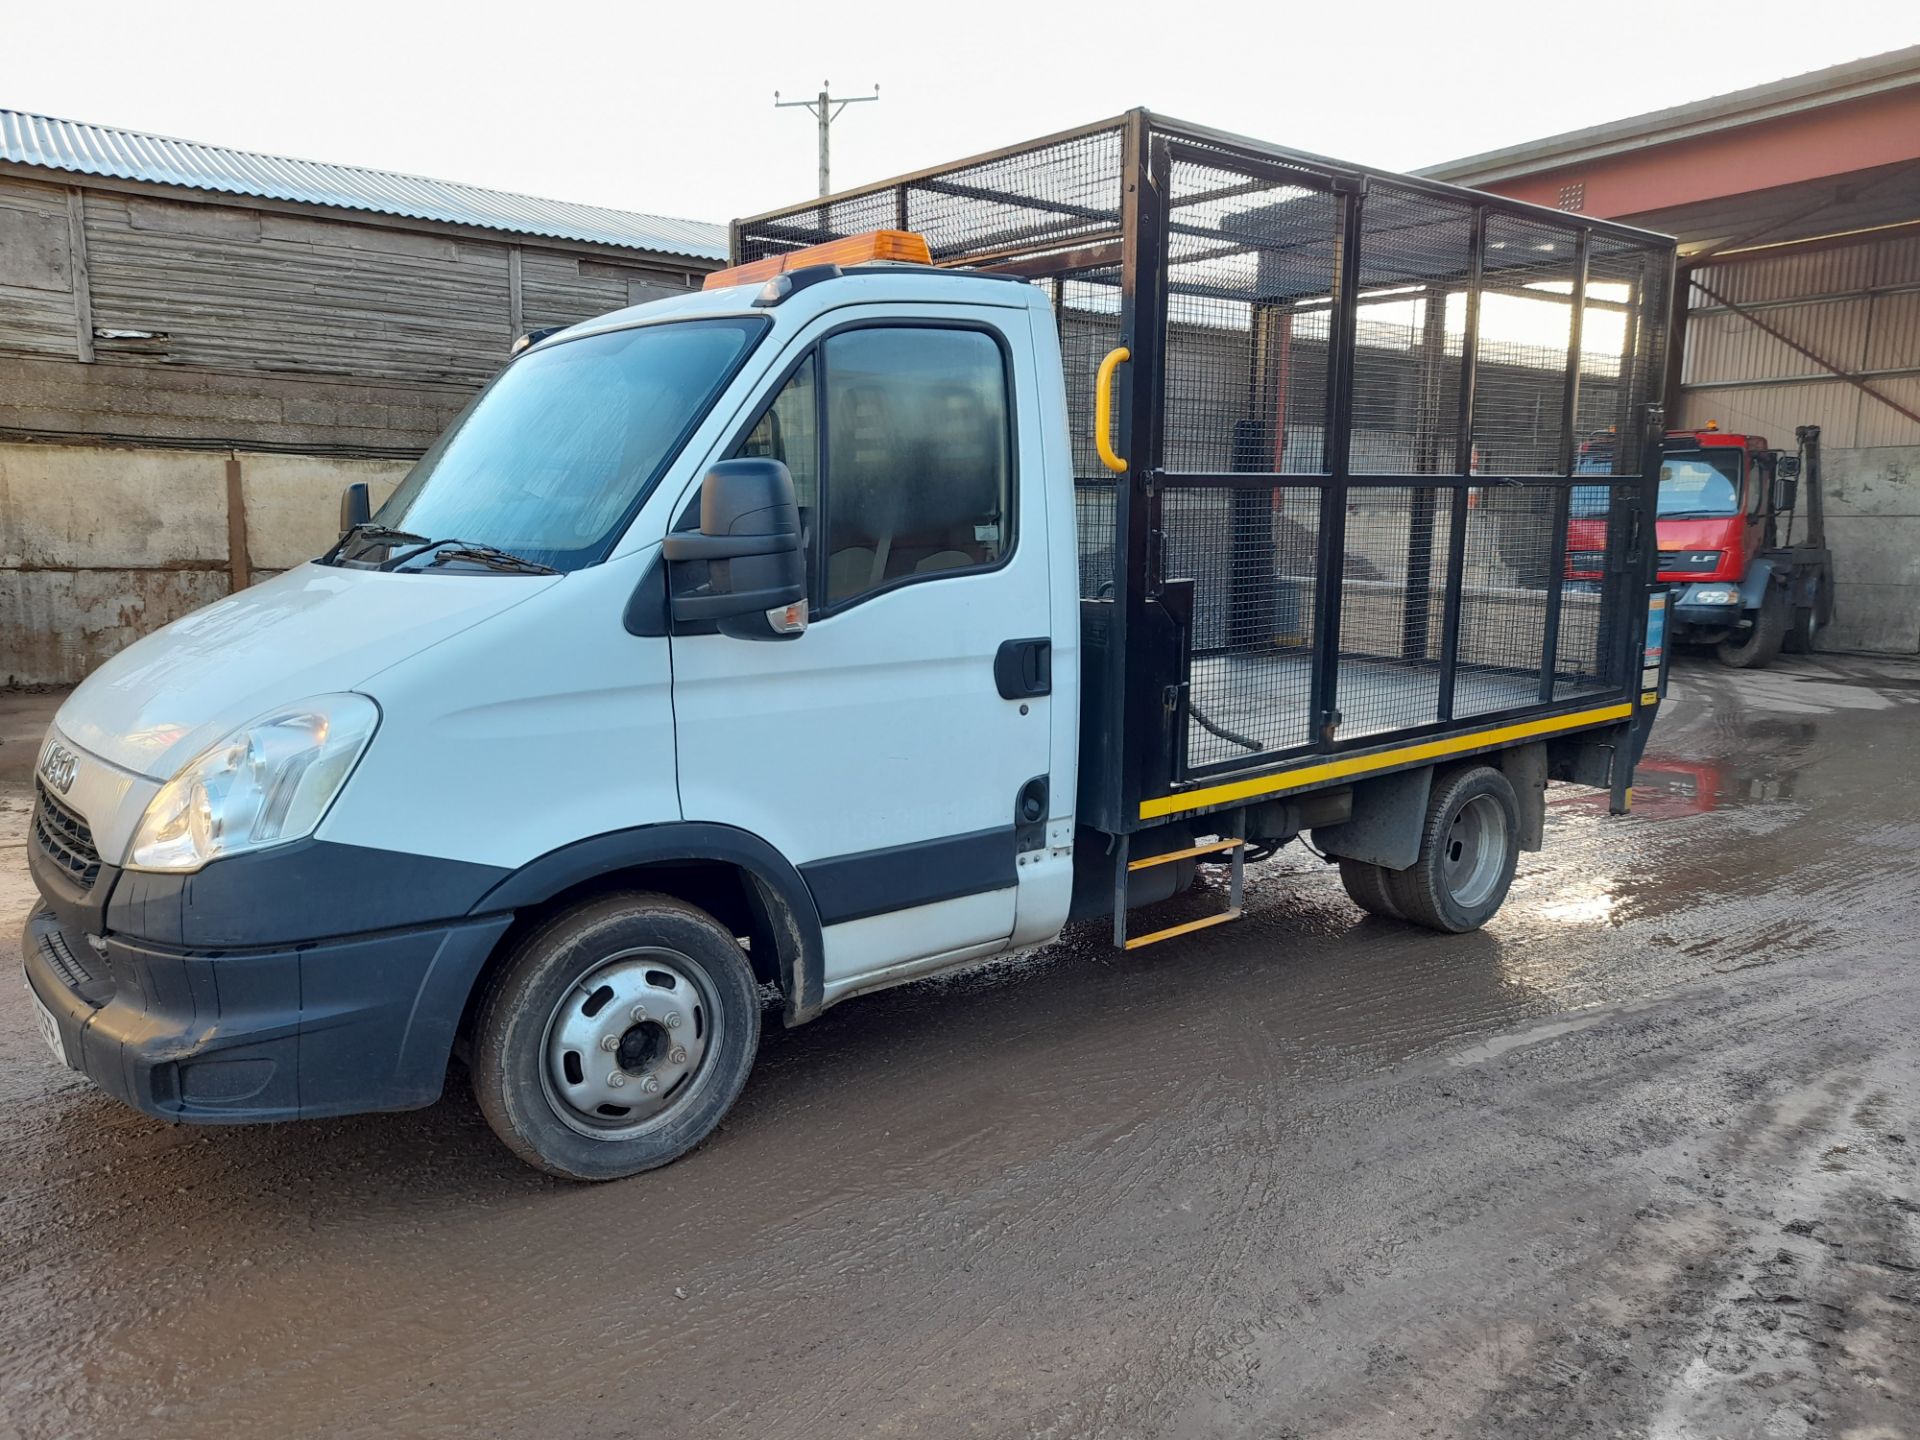 Iveco Daily 35C15 MWB Cage Tipper Van with Tail Lift and Spenborough Engineering cage, s/n 2373, - Image 3 of 13